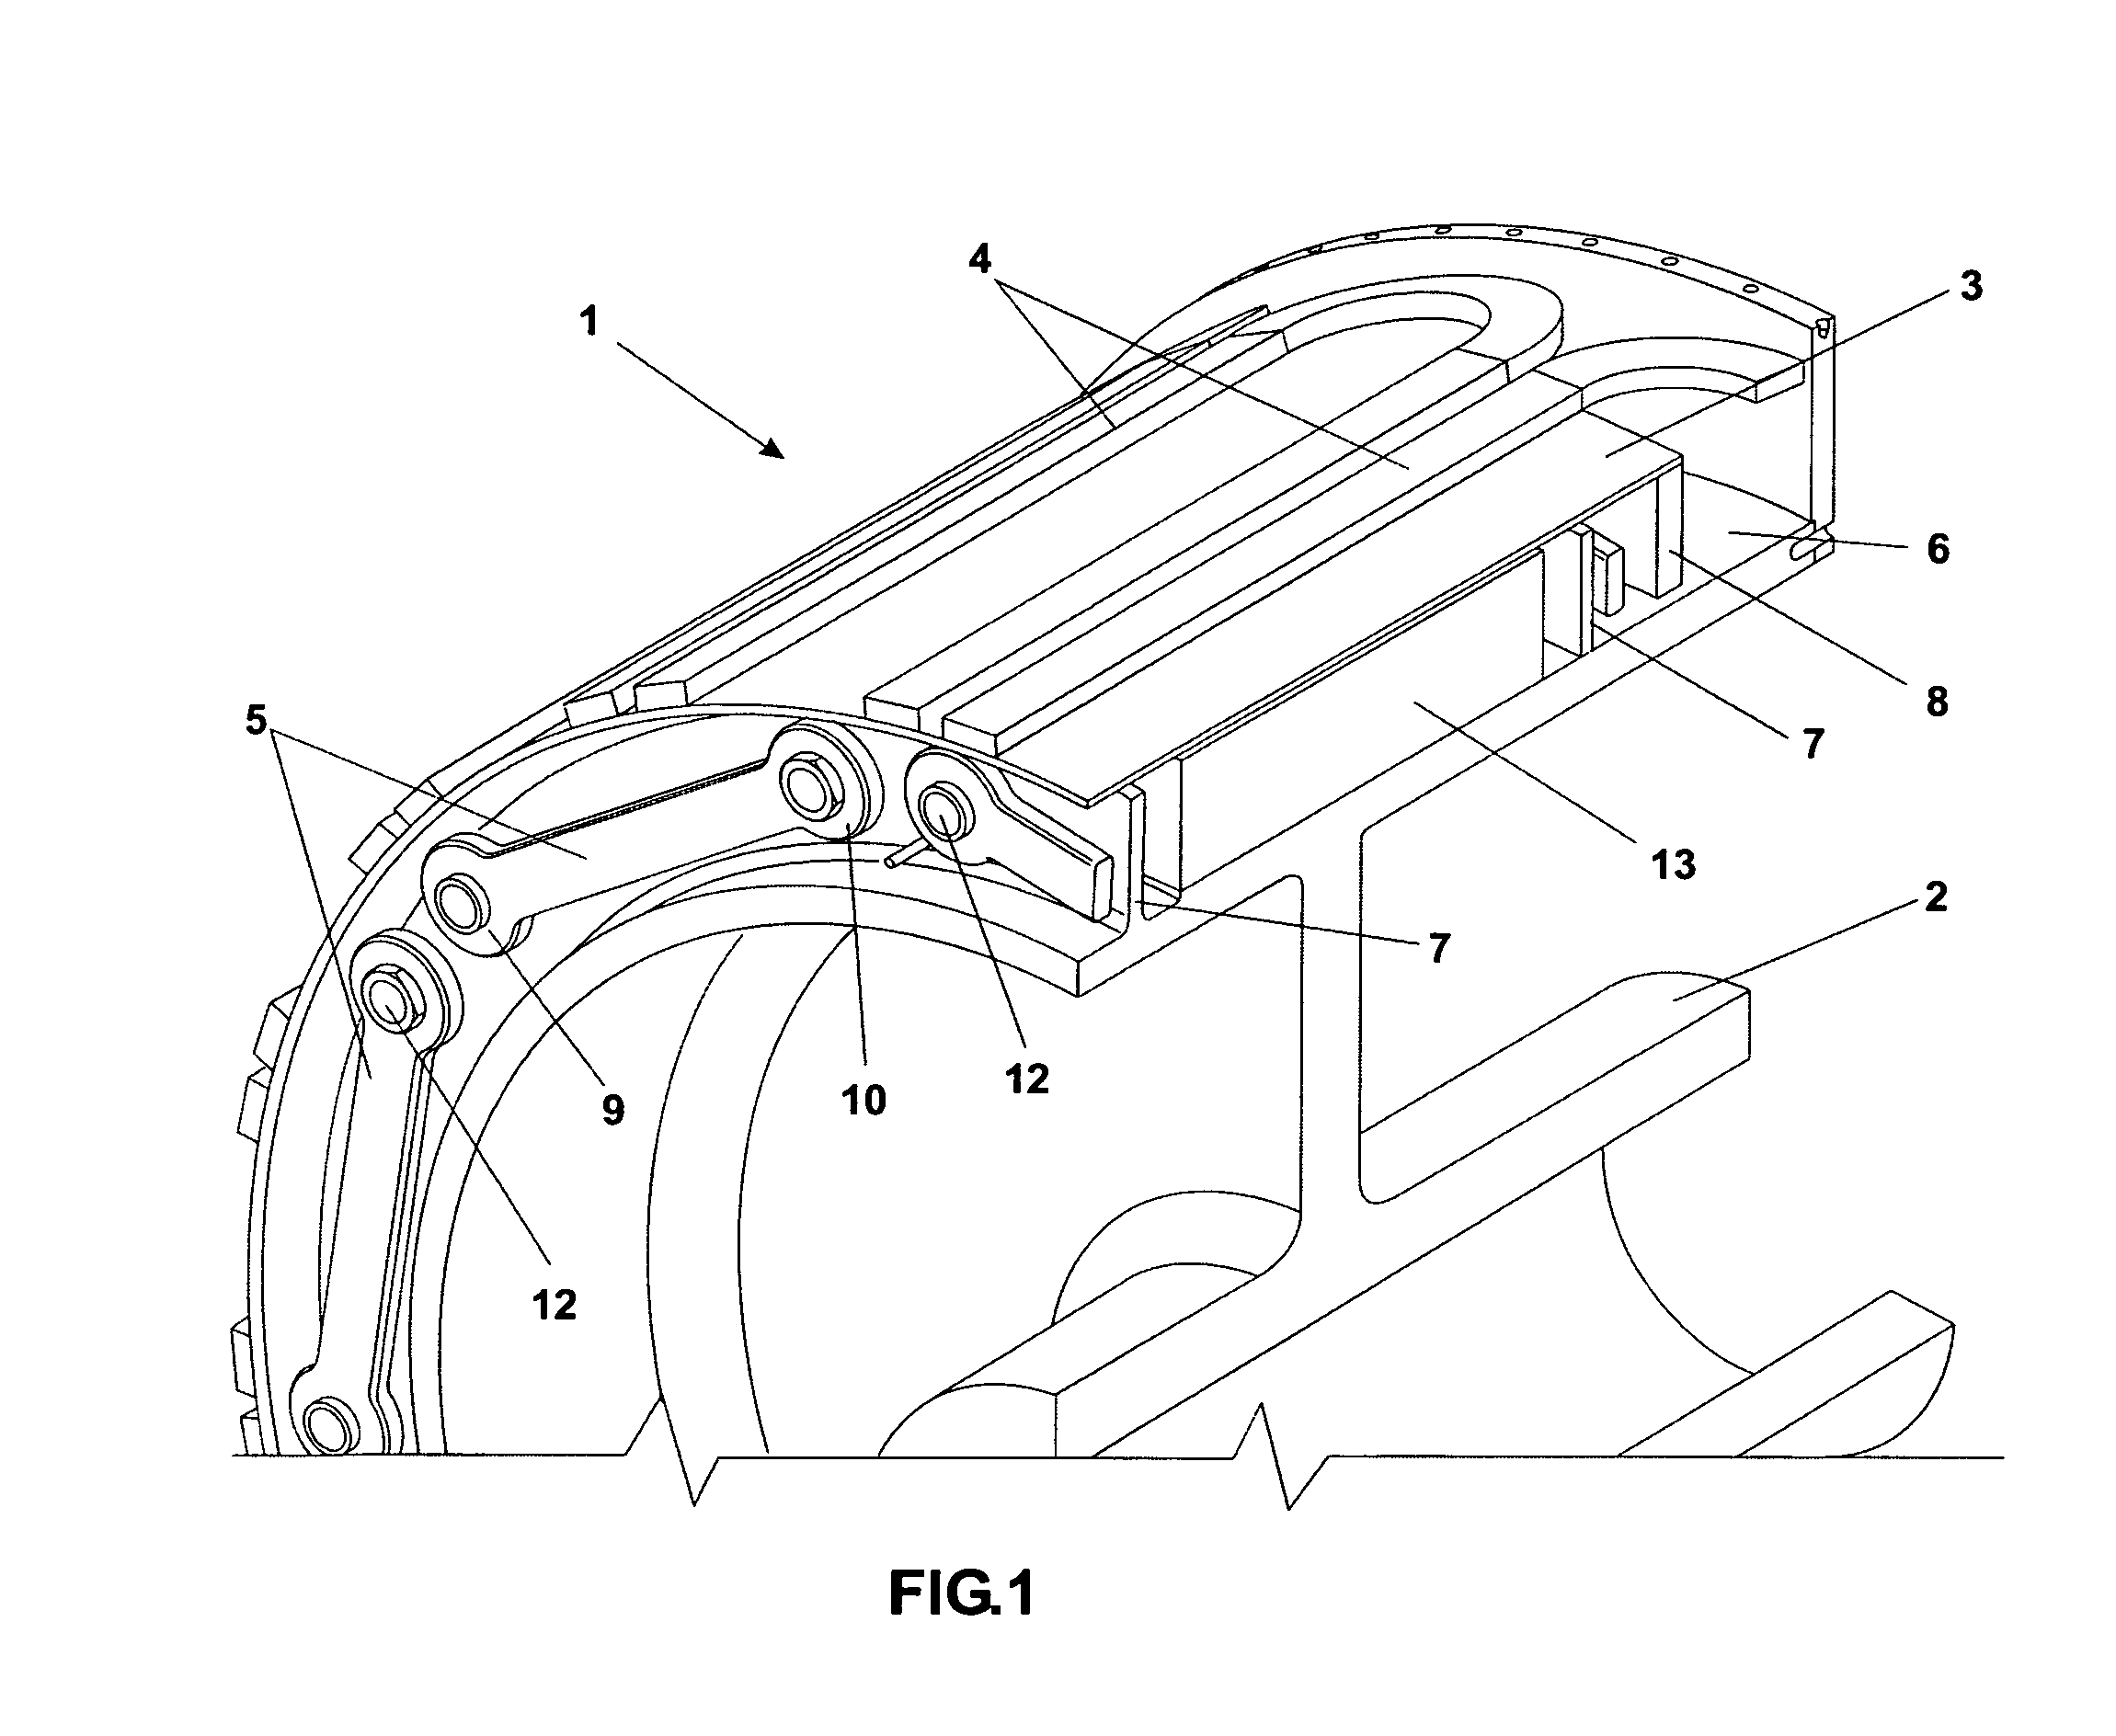 Rotor or a stator for a superconducting electrical machine